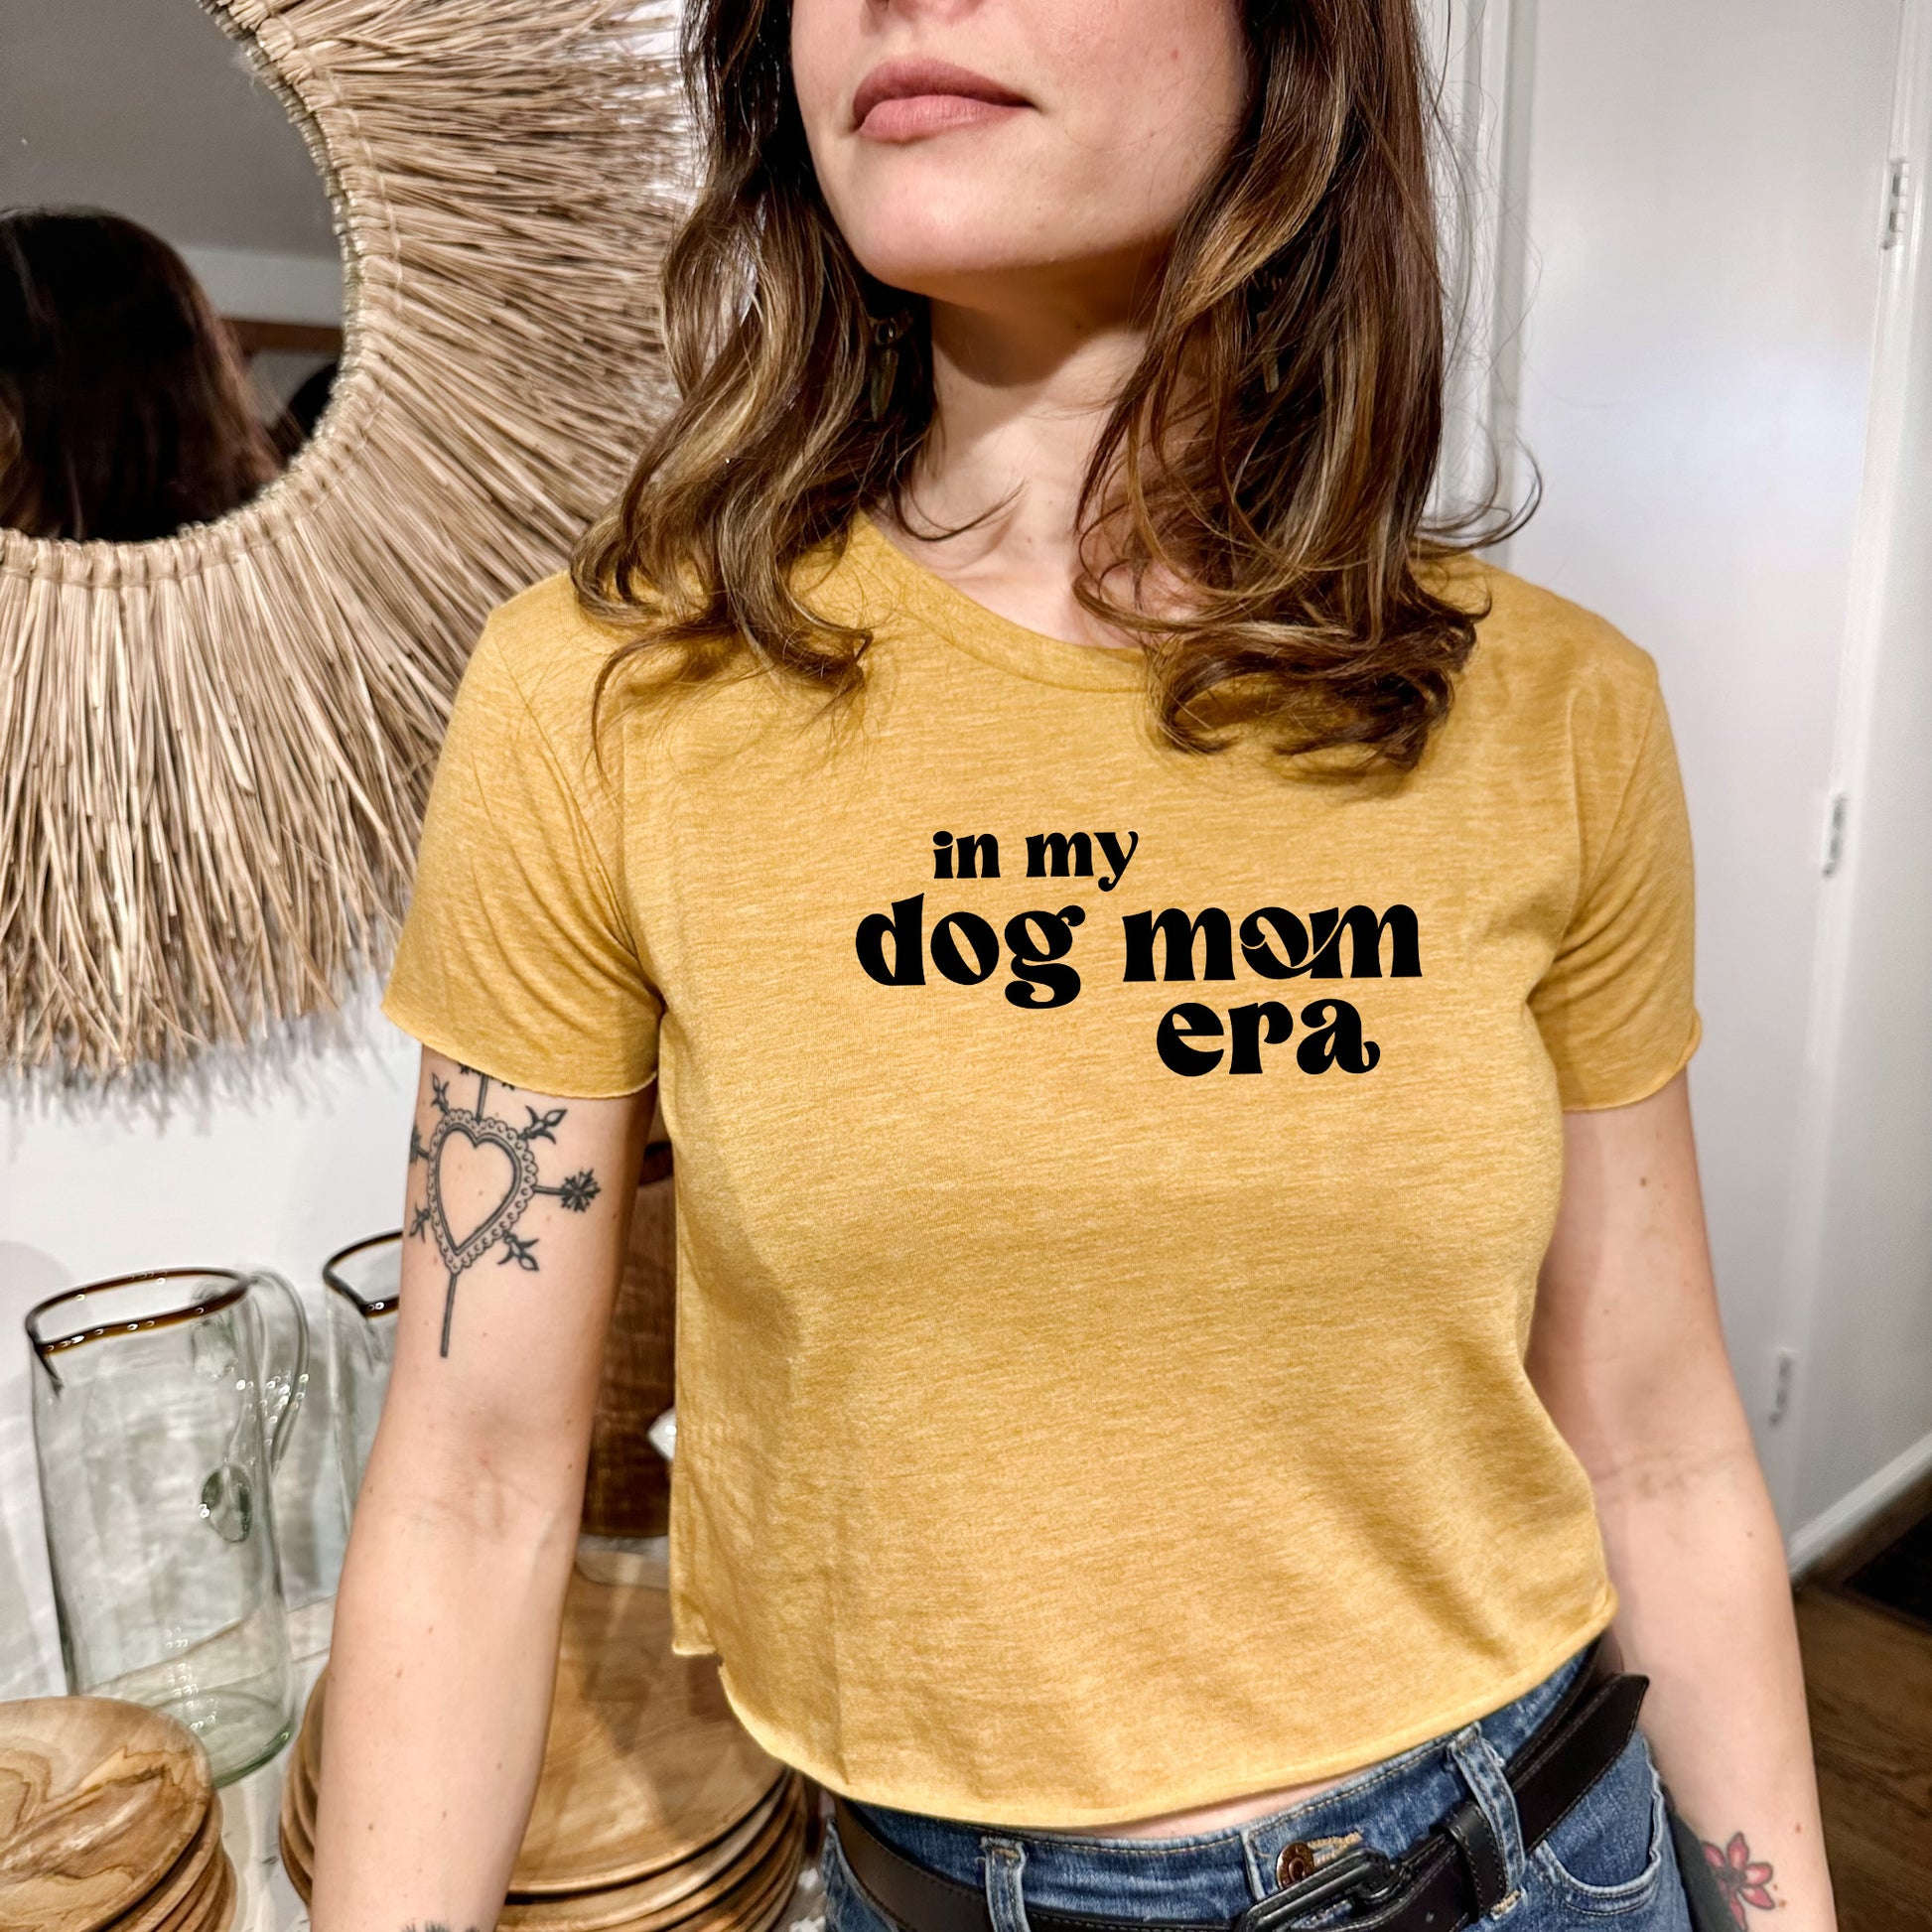 a woman wearing a t - shirt that says in my dog mom era